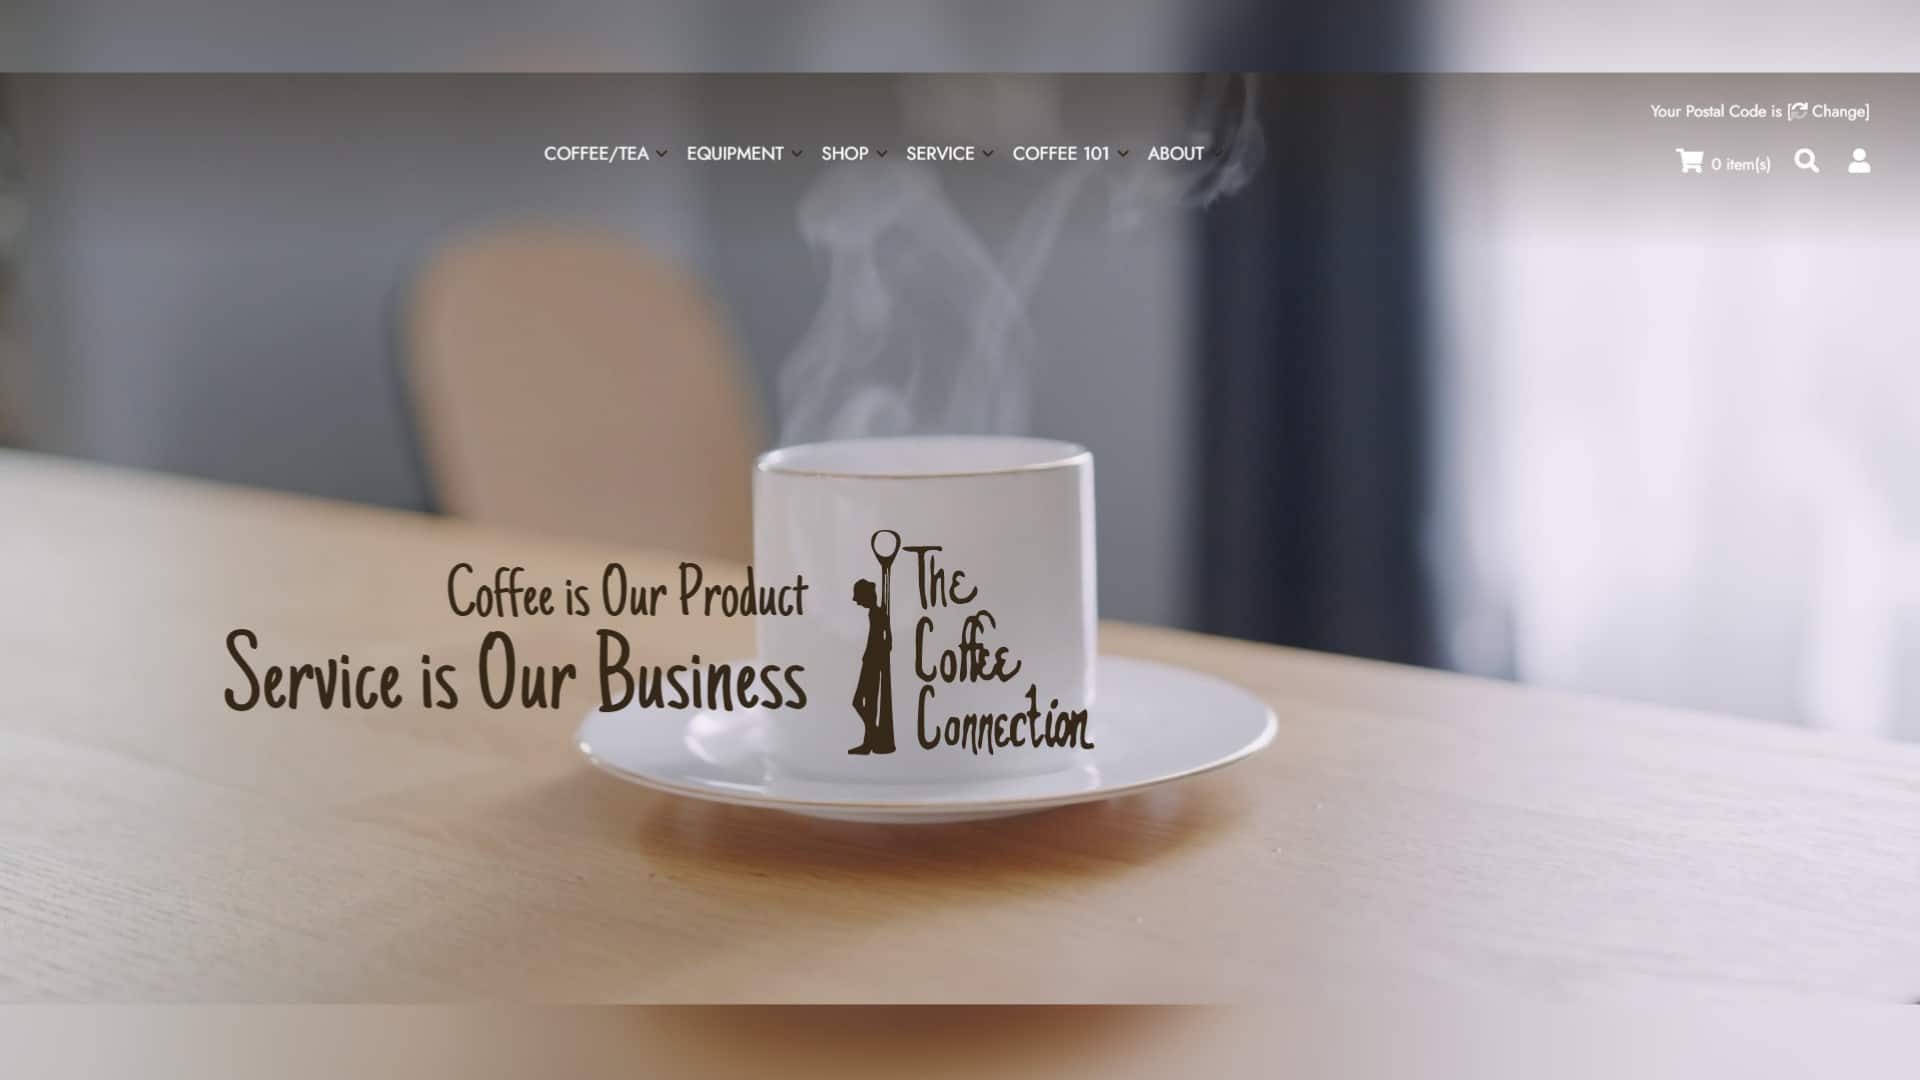 Coffee Connection Website Design Project